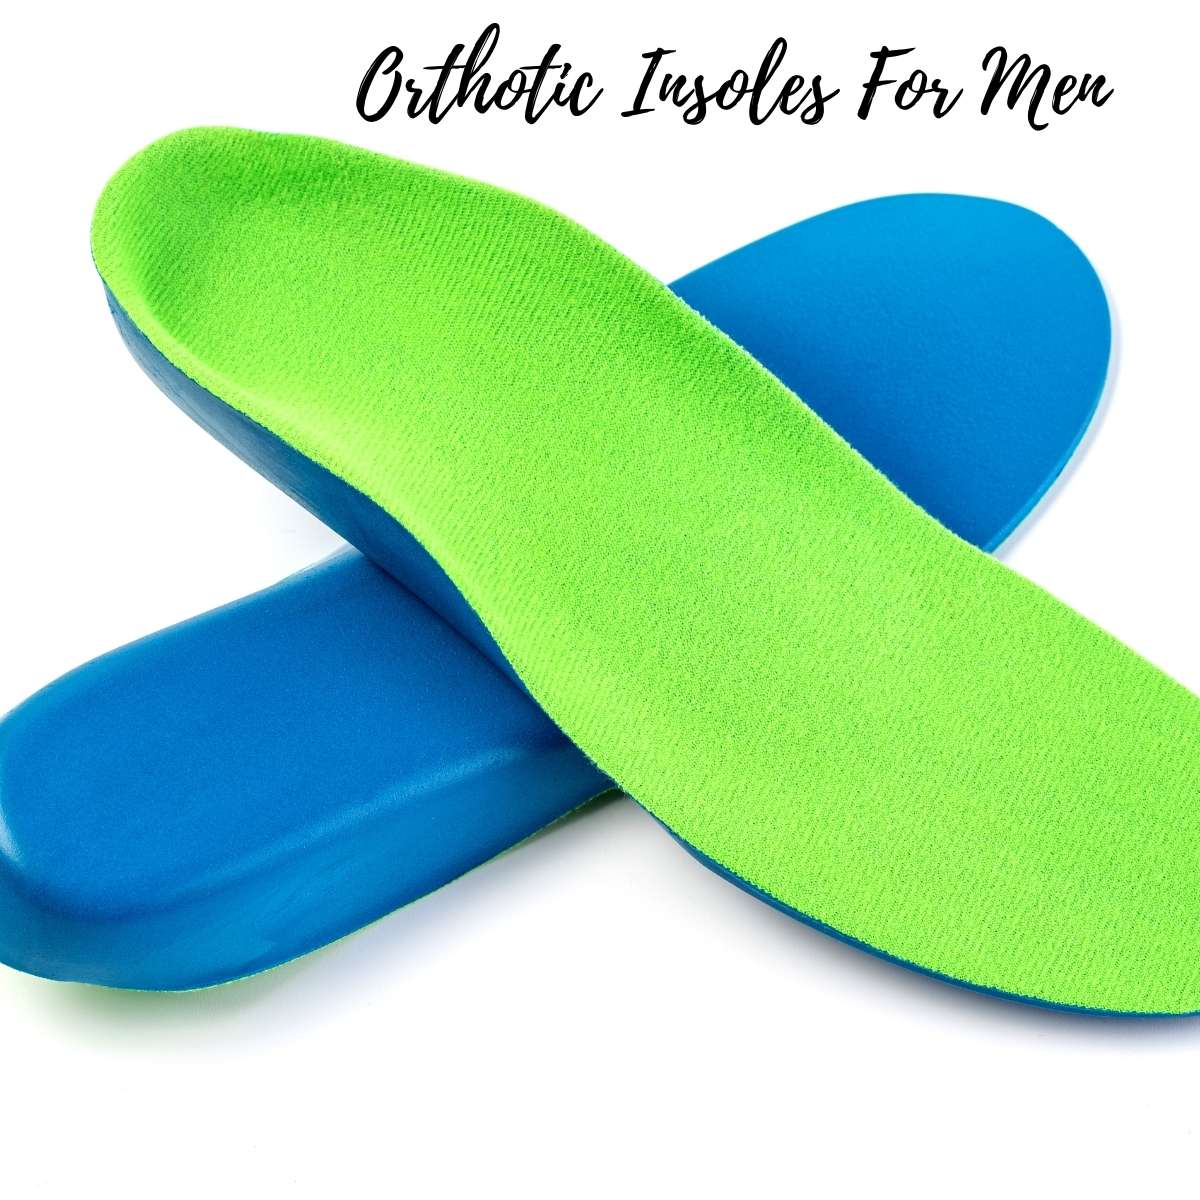 Best Orthotic Insoles For Men In 2021